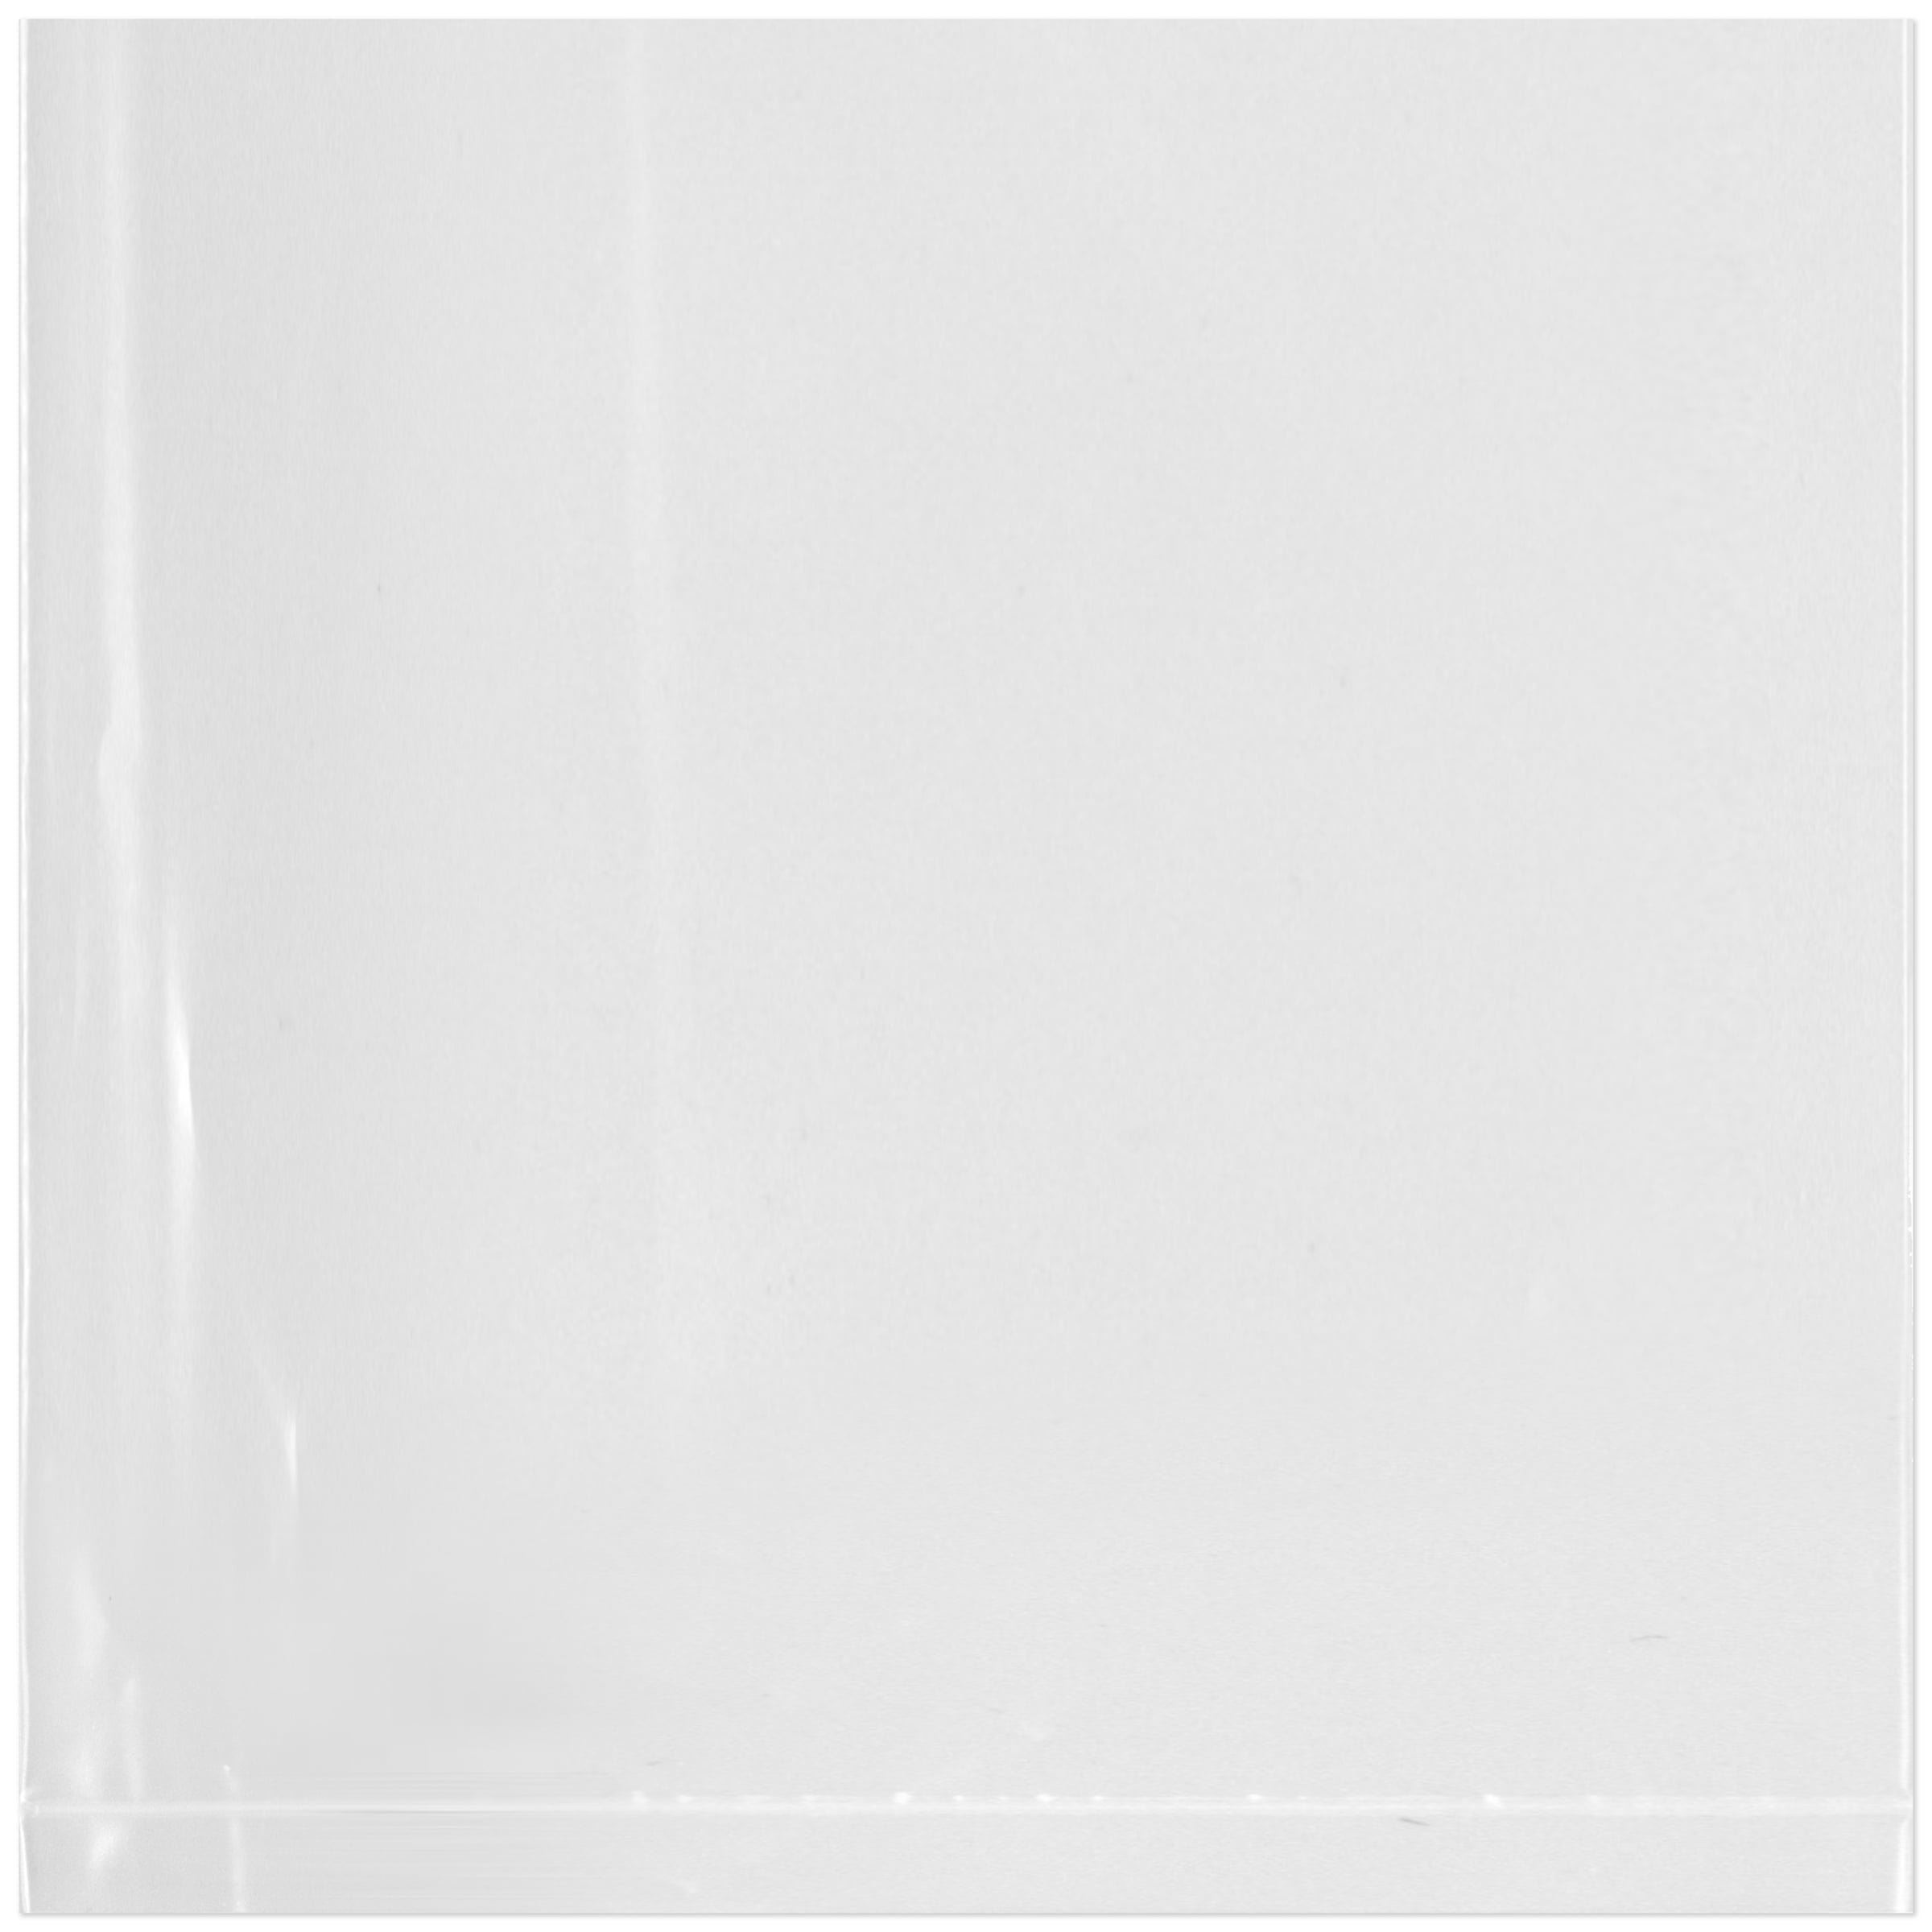 Storage Bag 200 3 Mil 10x12 Owlpack Clear Poly Open End Plastic Product 